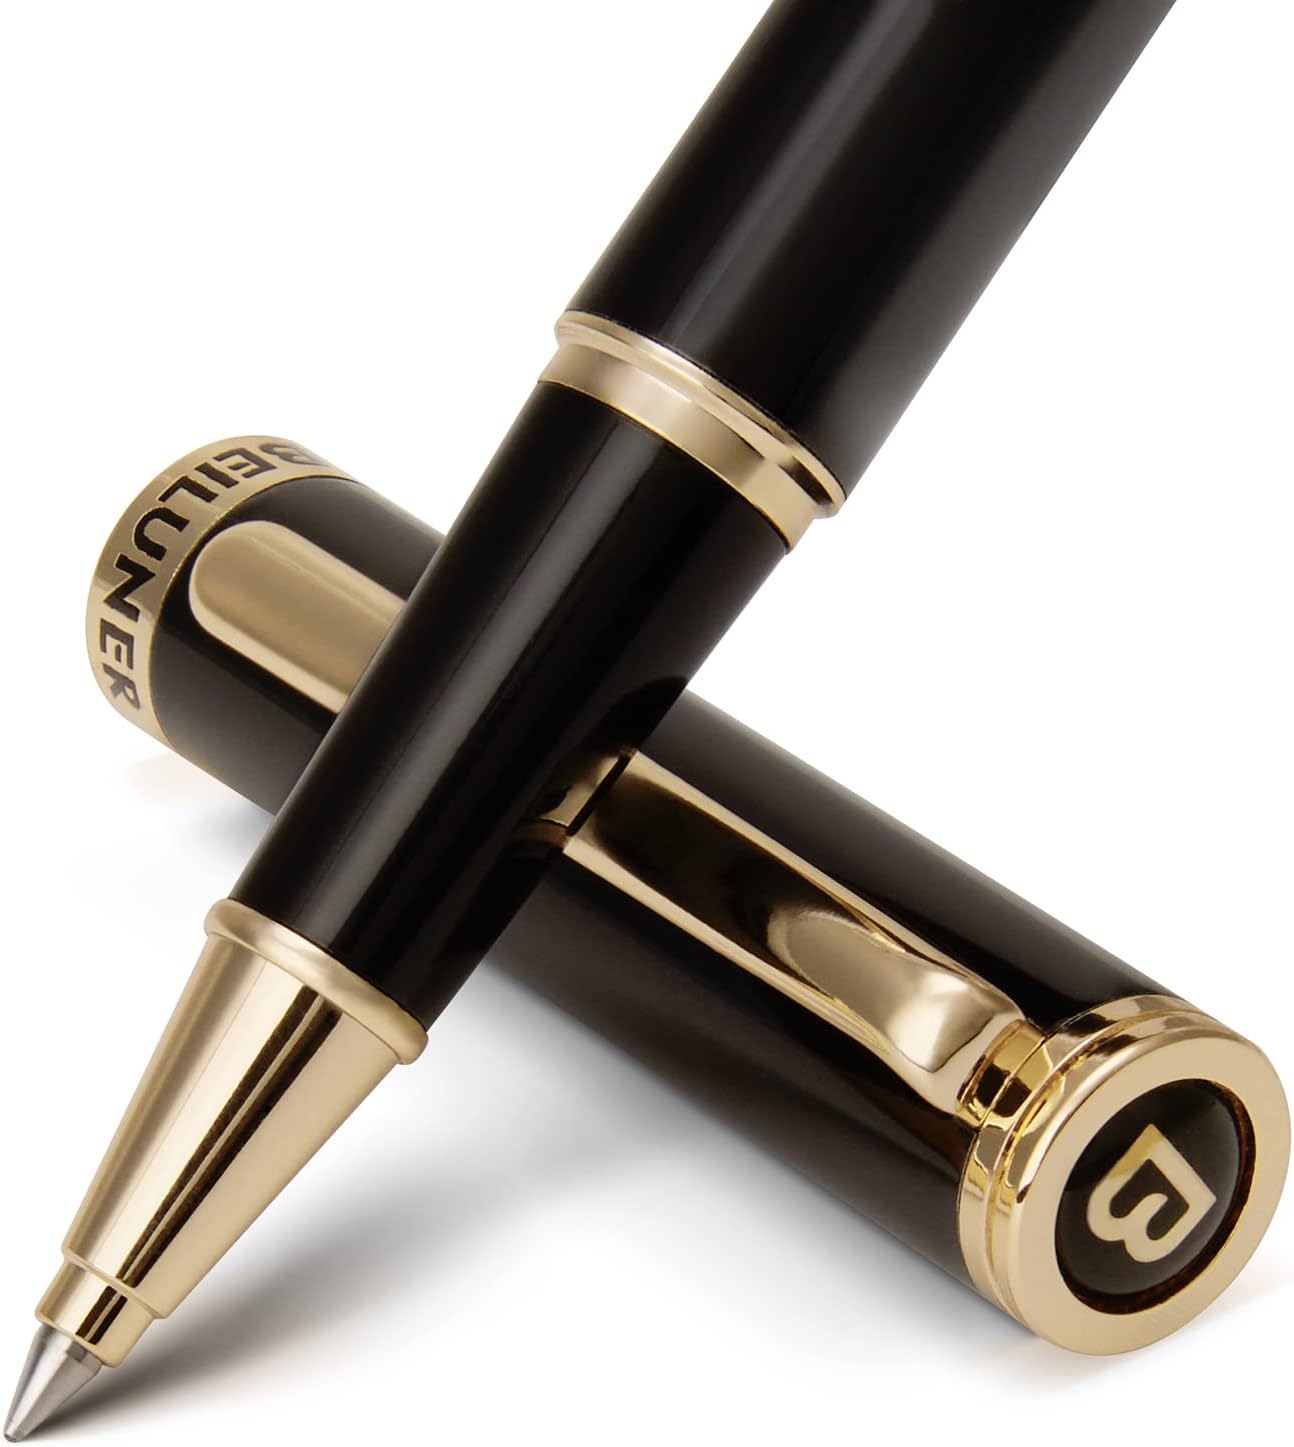 I have had many sonnet pens in the past and this one is of equal quality, but a fraction of the price. Nice gold accents and fits my hand perfectly. I will purchase more for gifts in the future, Well done.